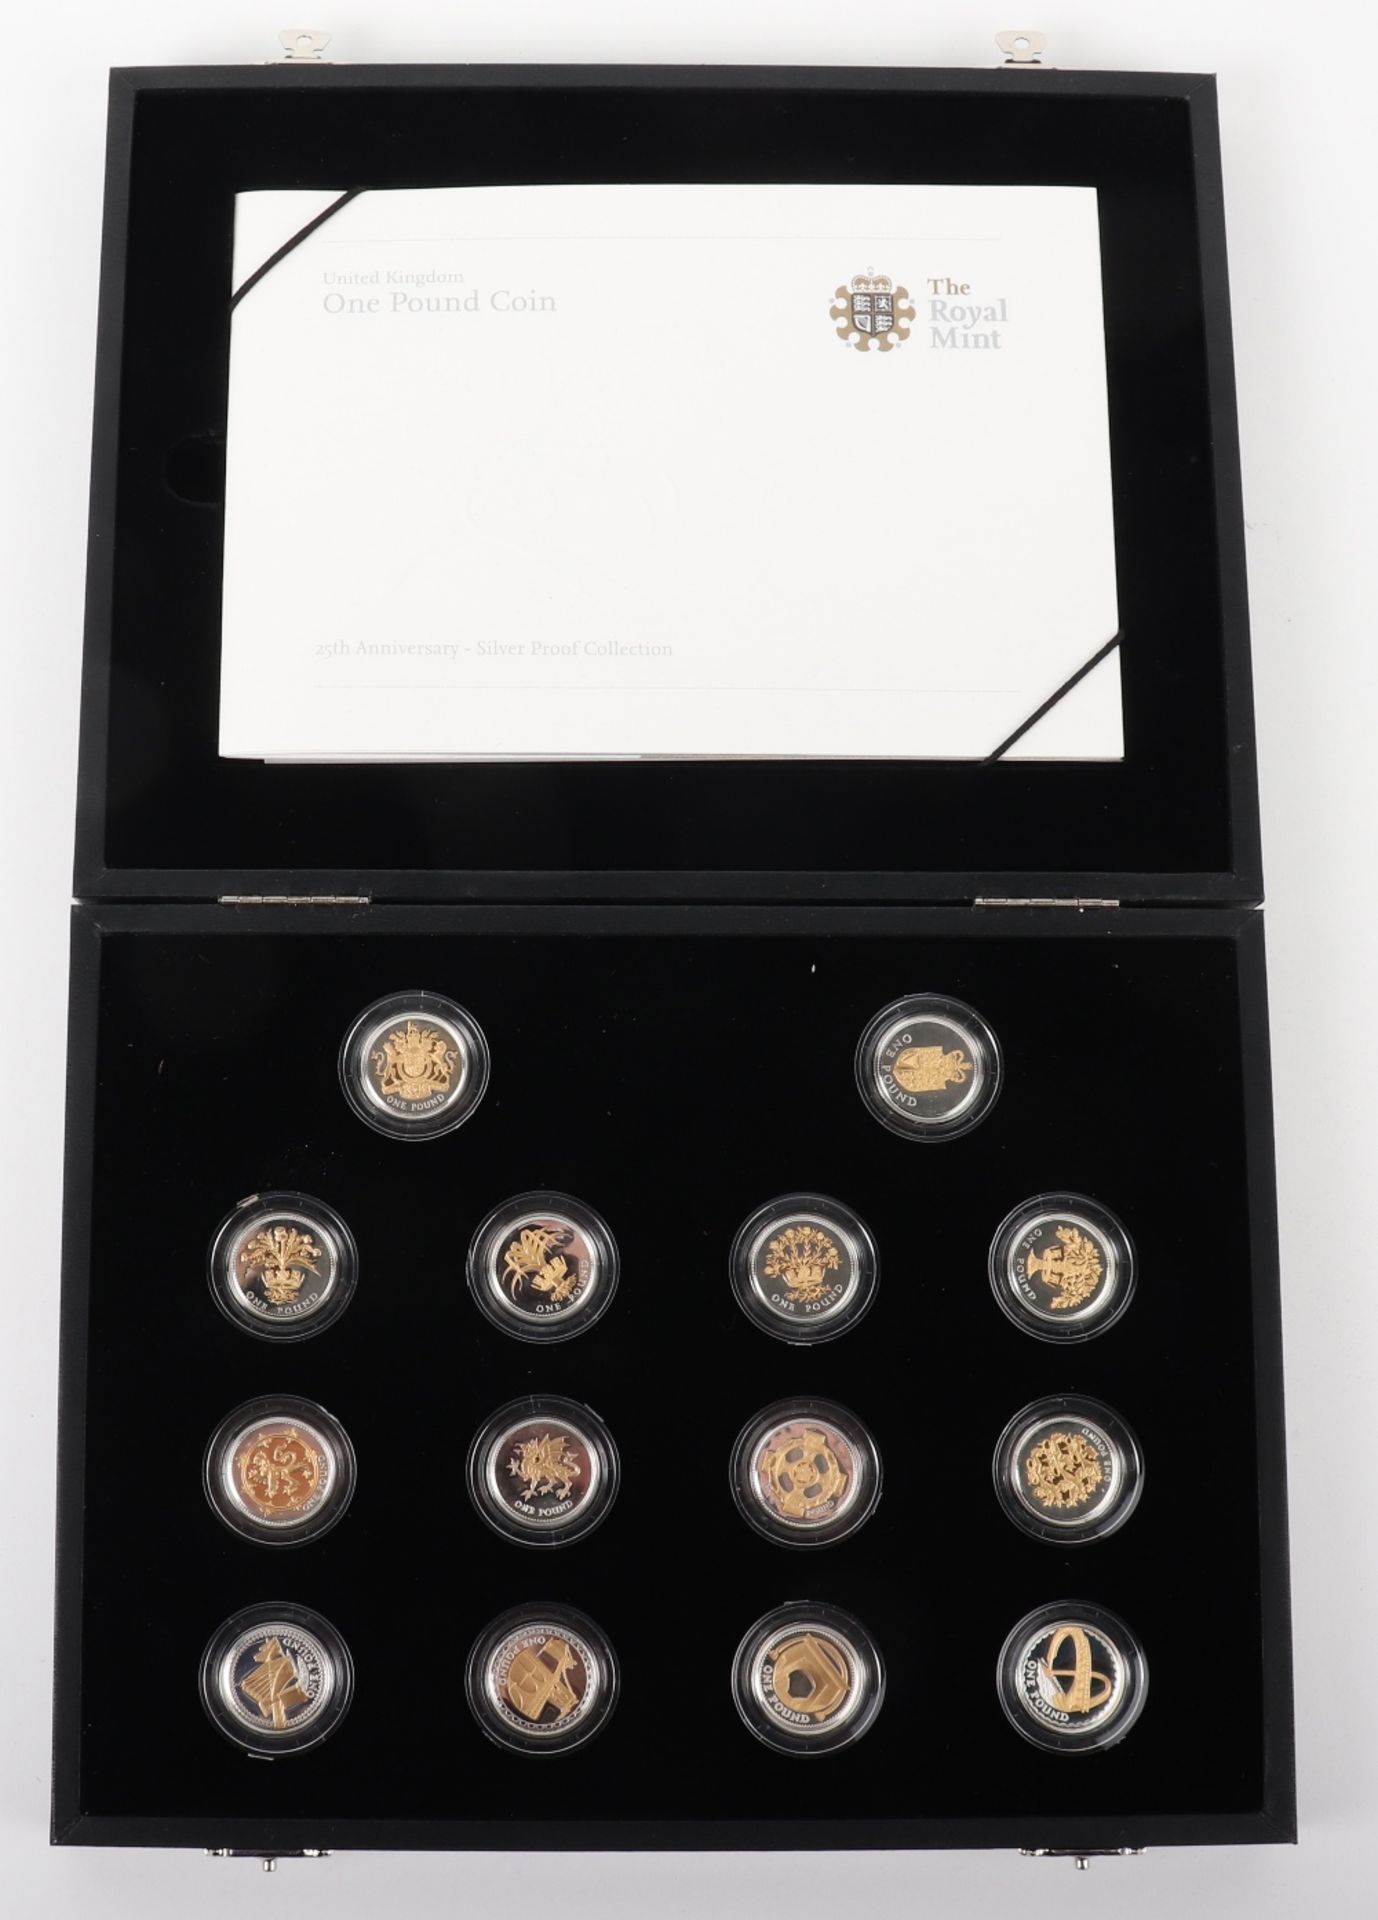 Royal Mint 25th Anniversary One Pound Coin Silver Proof Collection